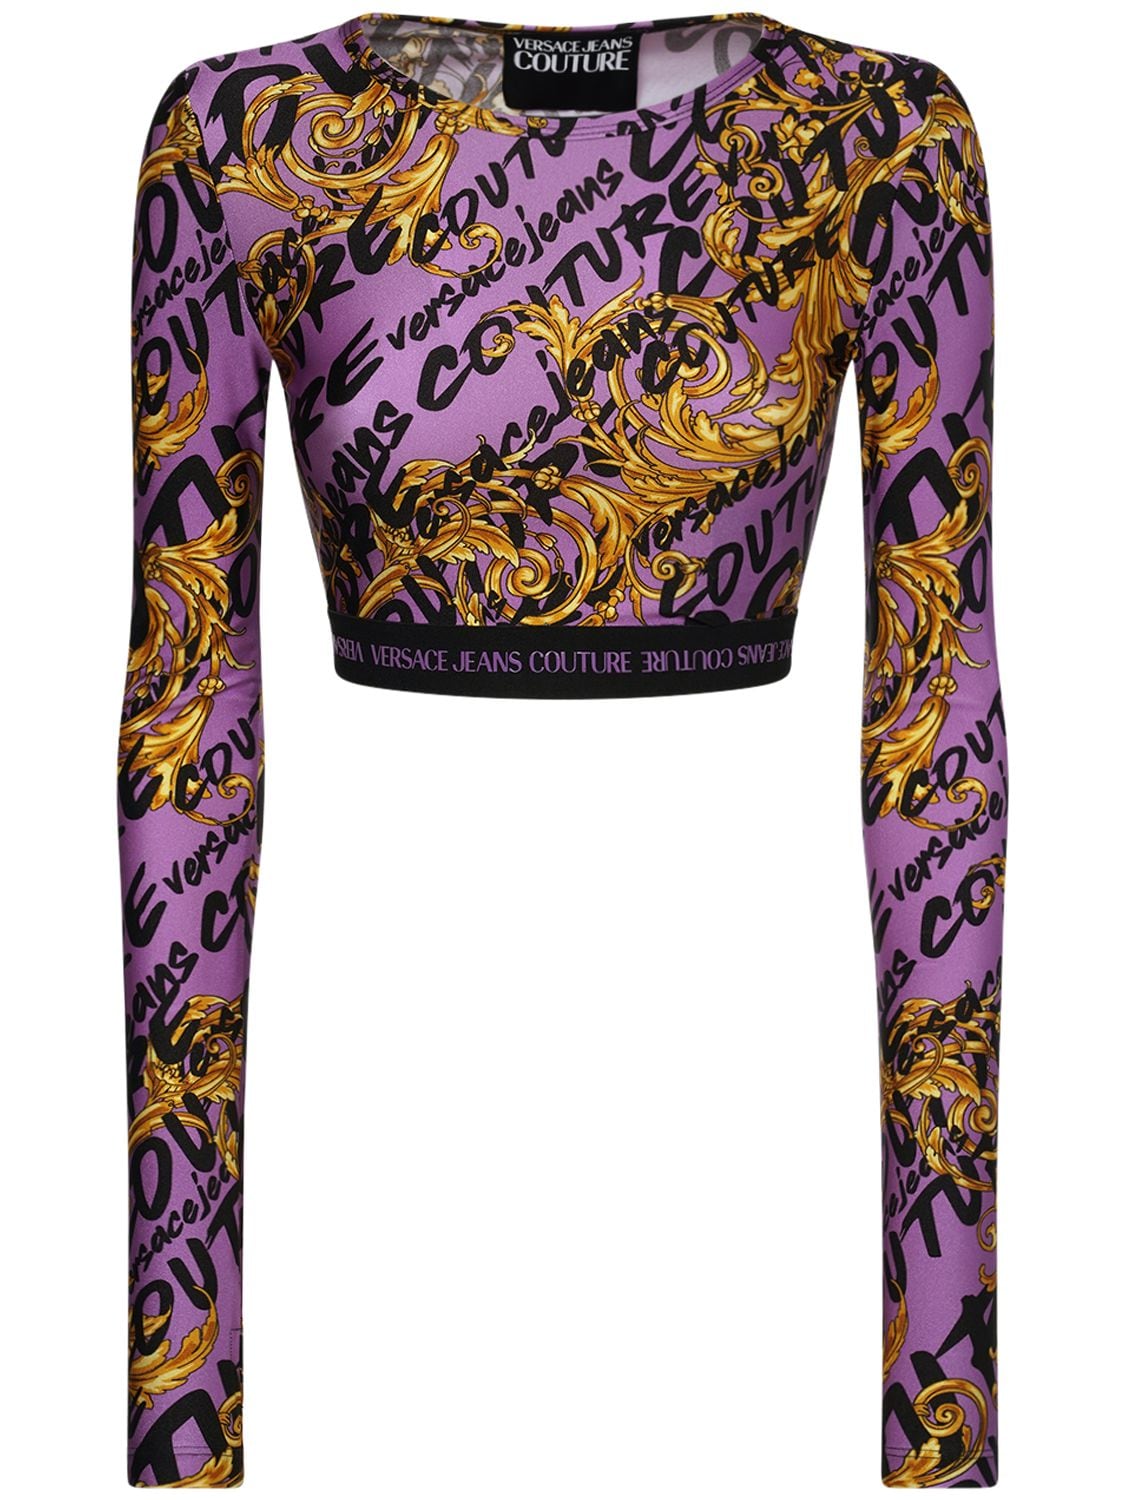 VERSACE JEANS COUTURE Printed Lycra Cropped T-shirt